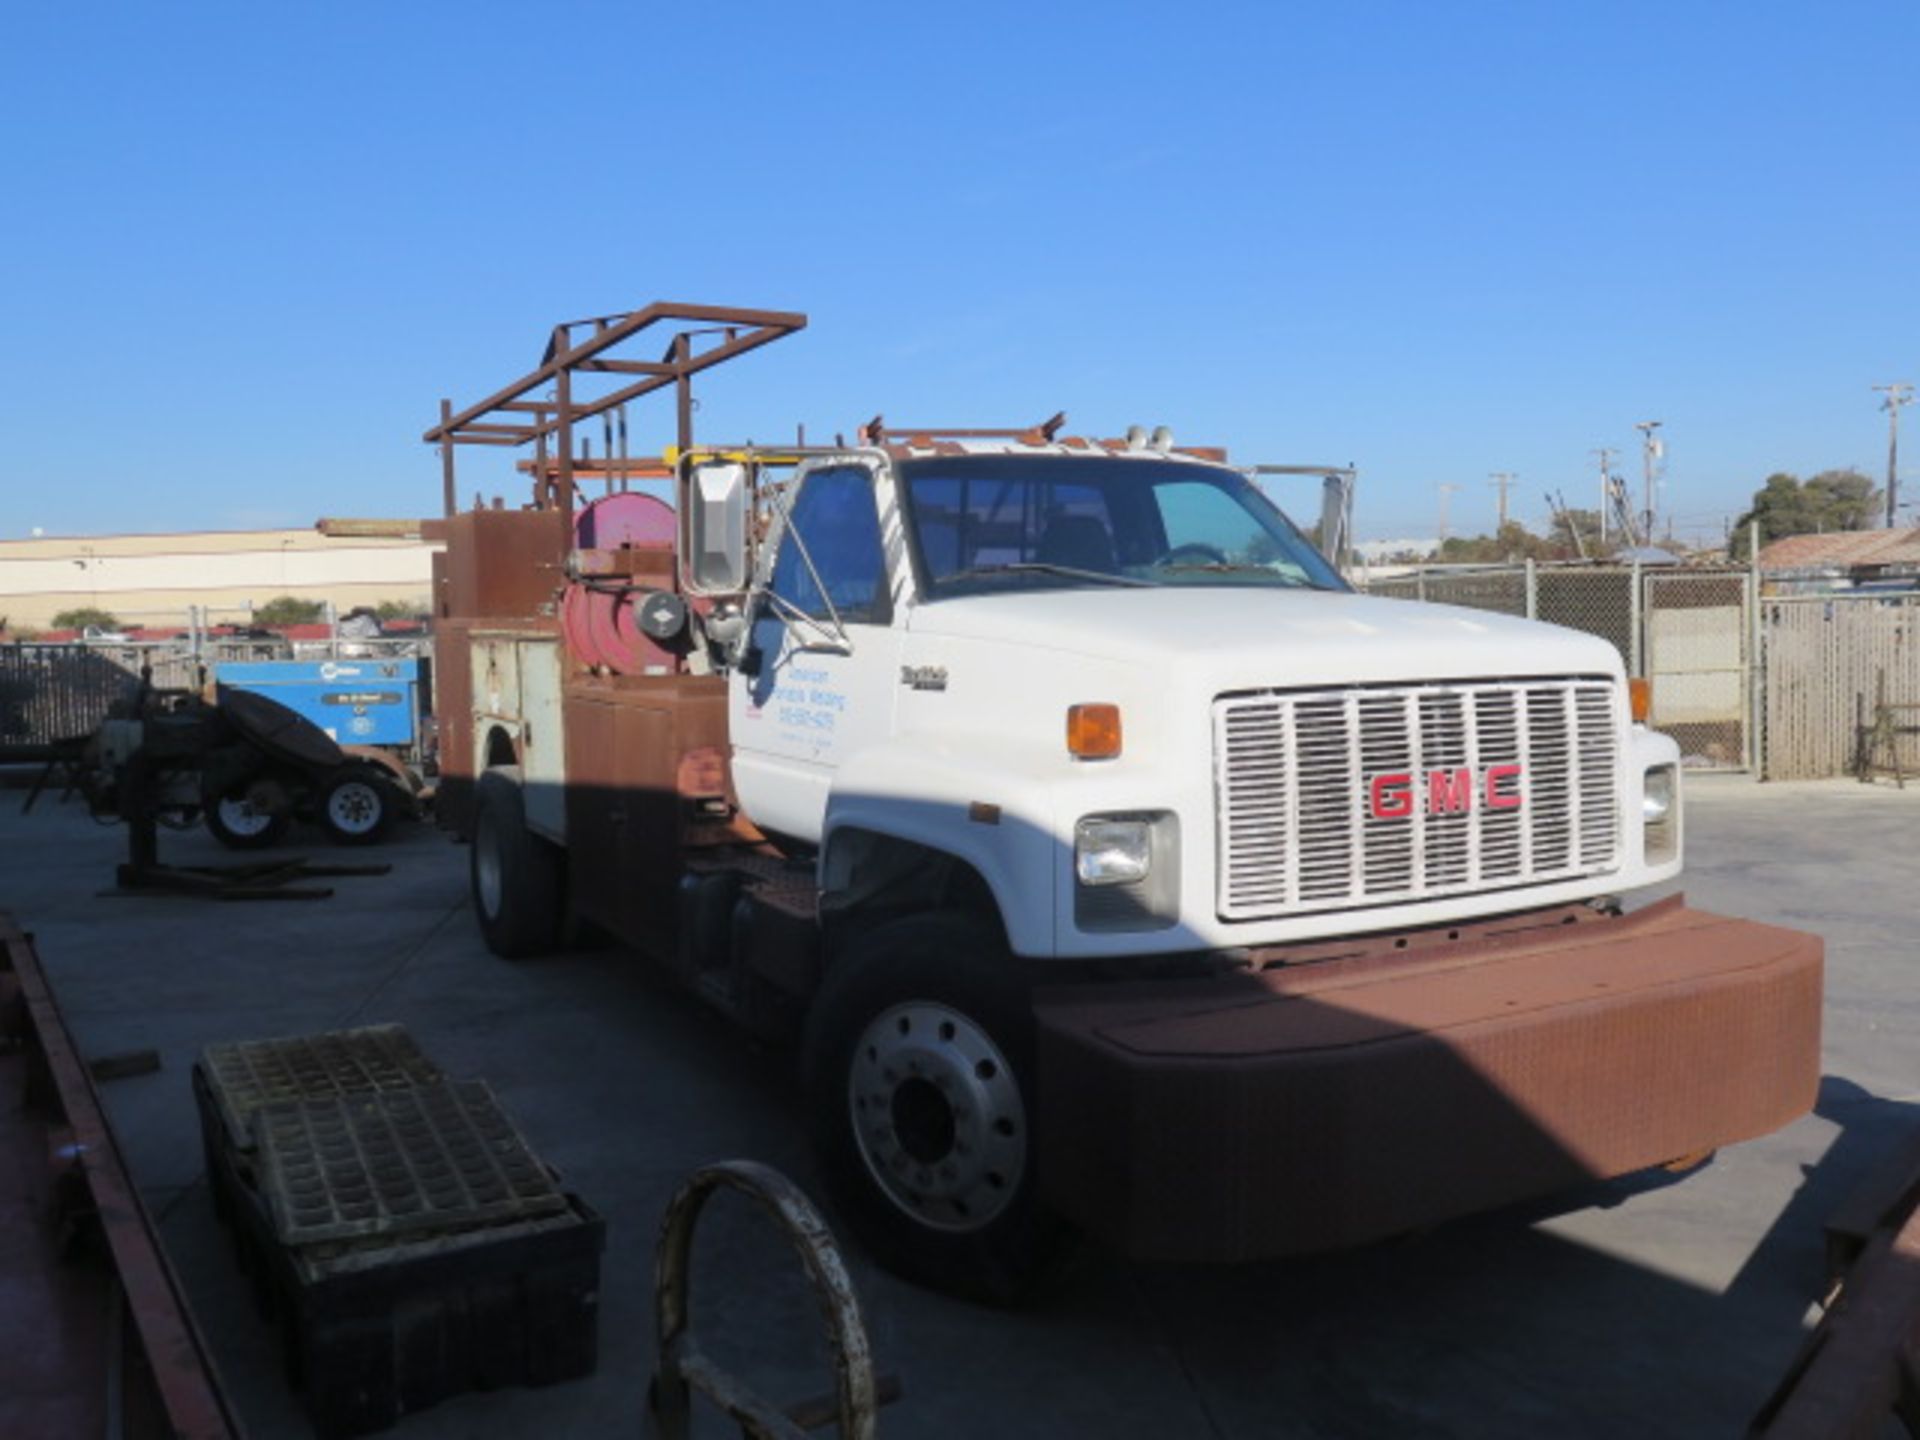 1992 GMC Top Kick Service Truck Lisc# 4J61885 w/ Caterpillar Diesel Engine, Automatic, SOLD AS IS - Image 2 of 24